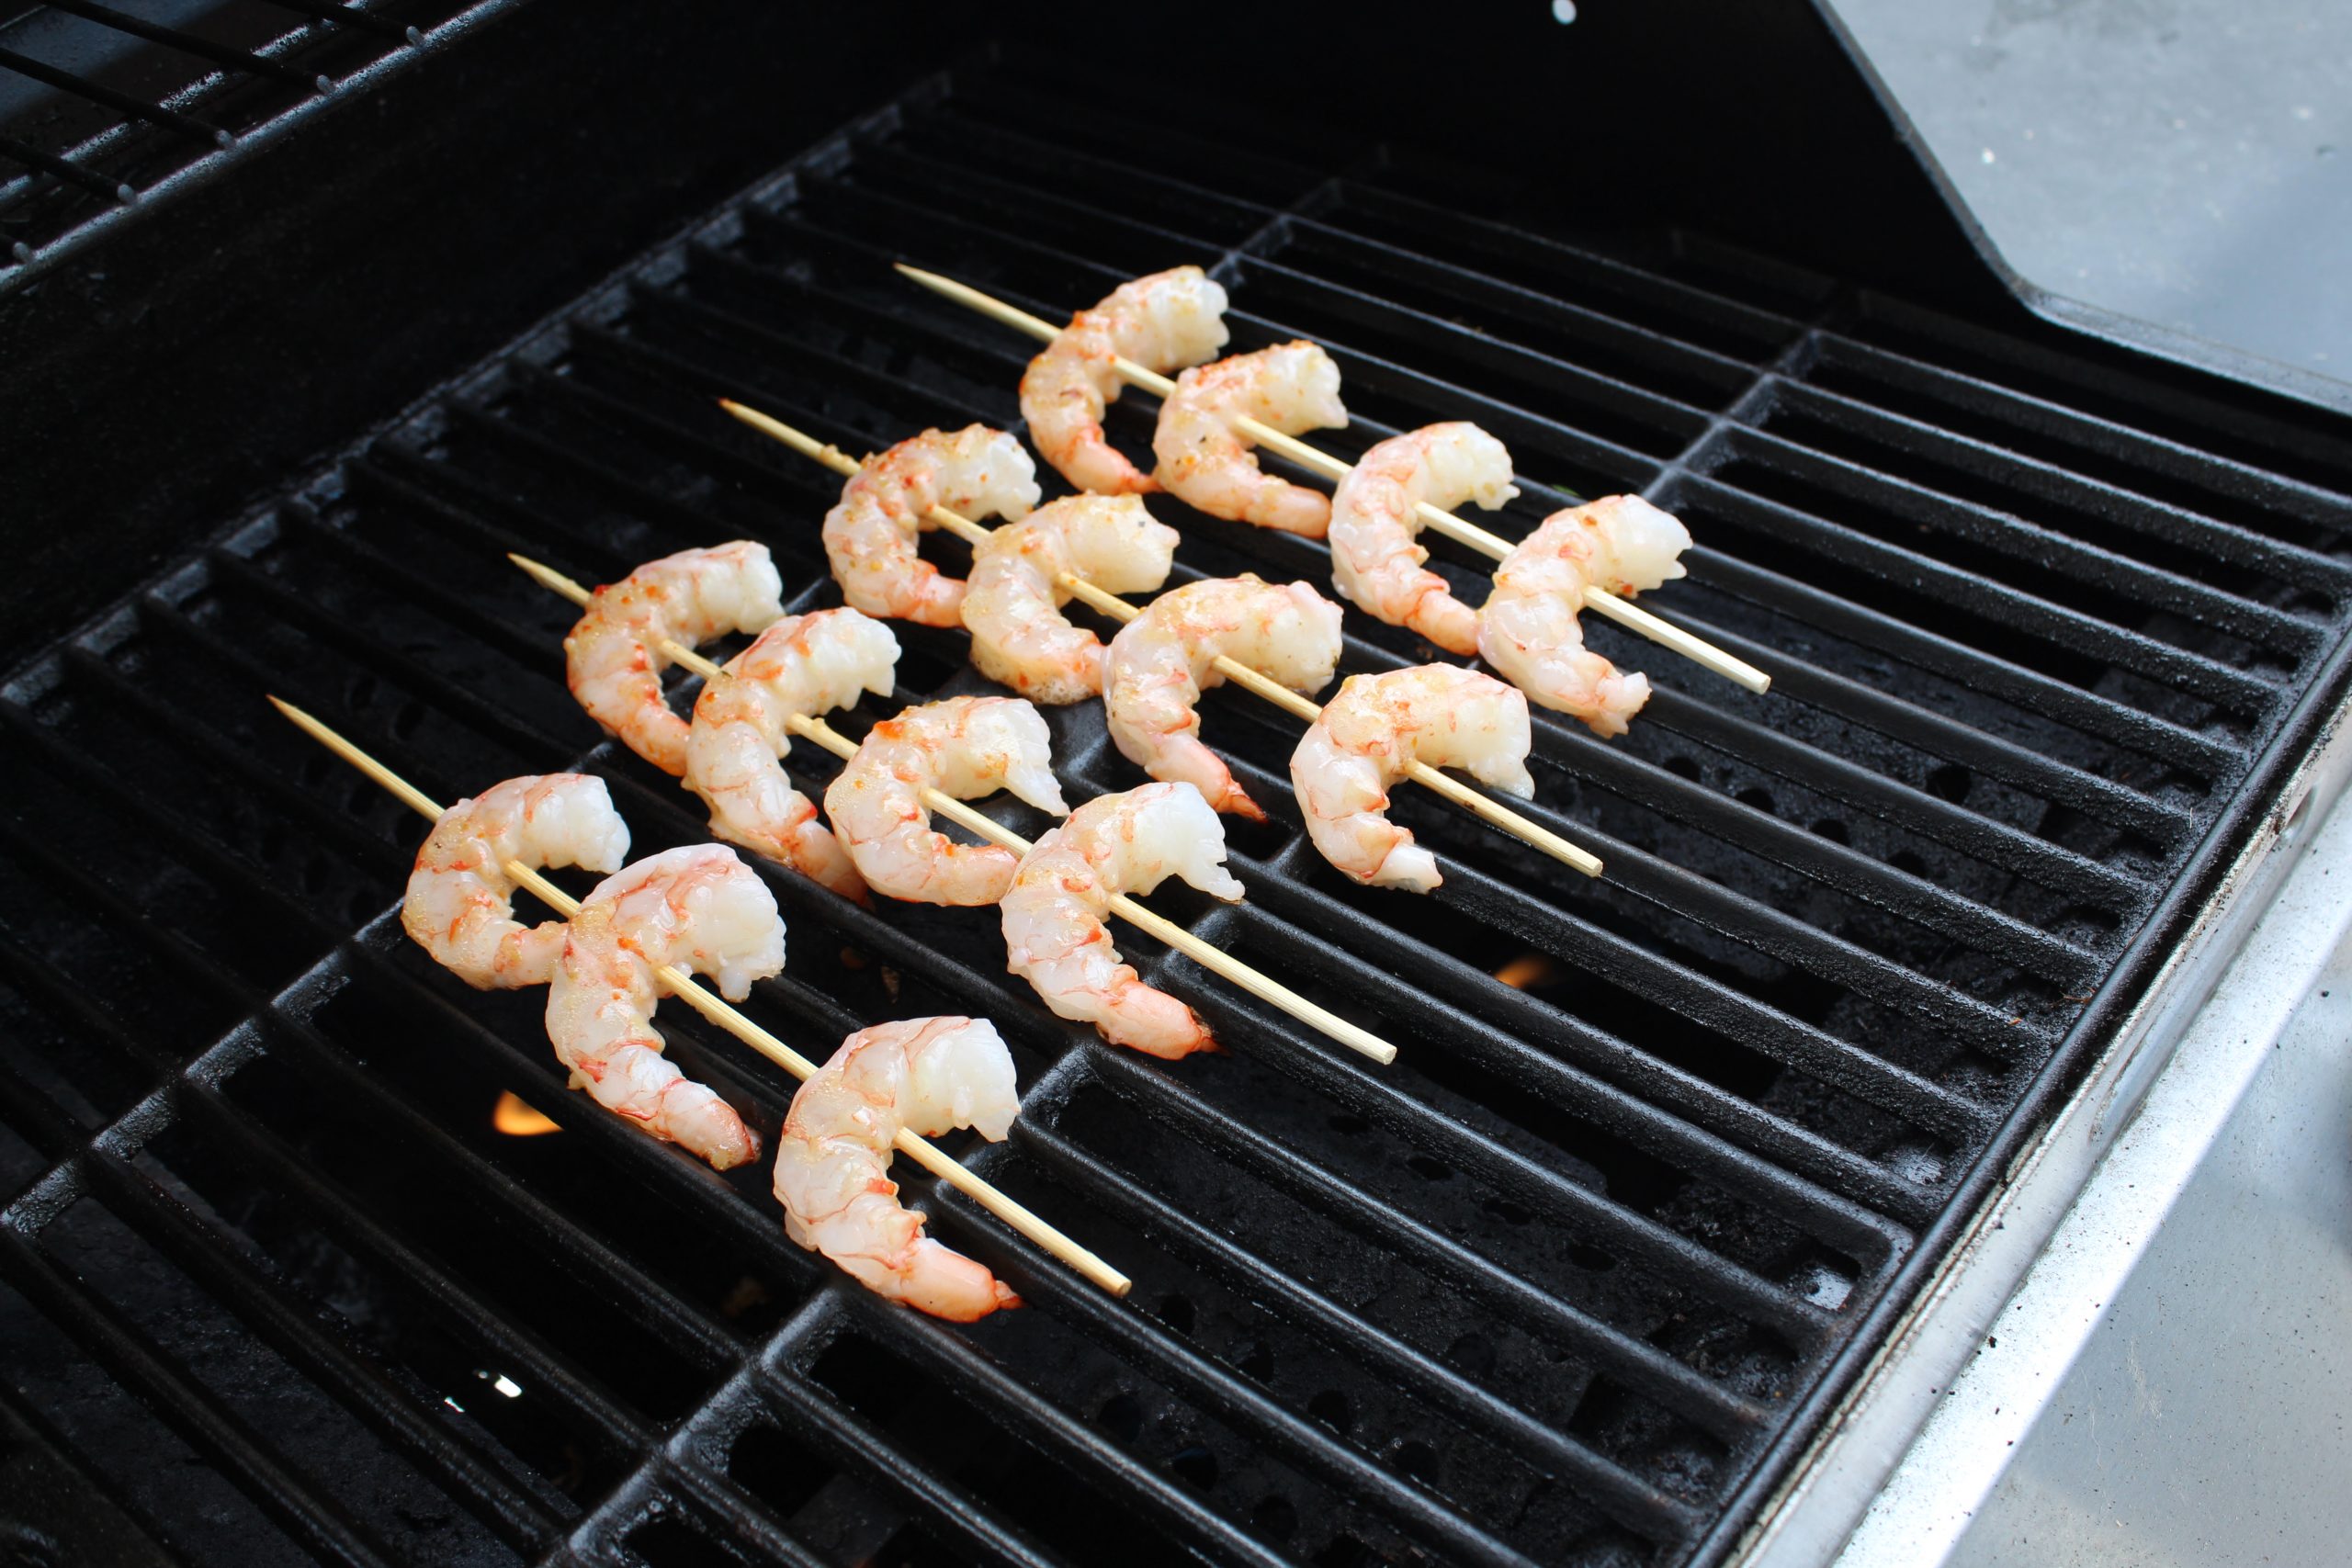 How to grill shrimp skewers